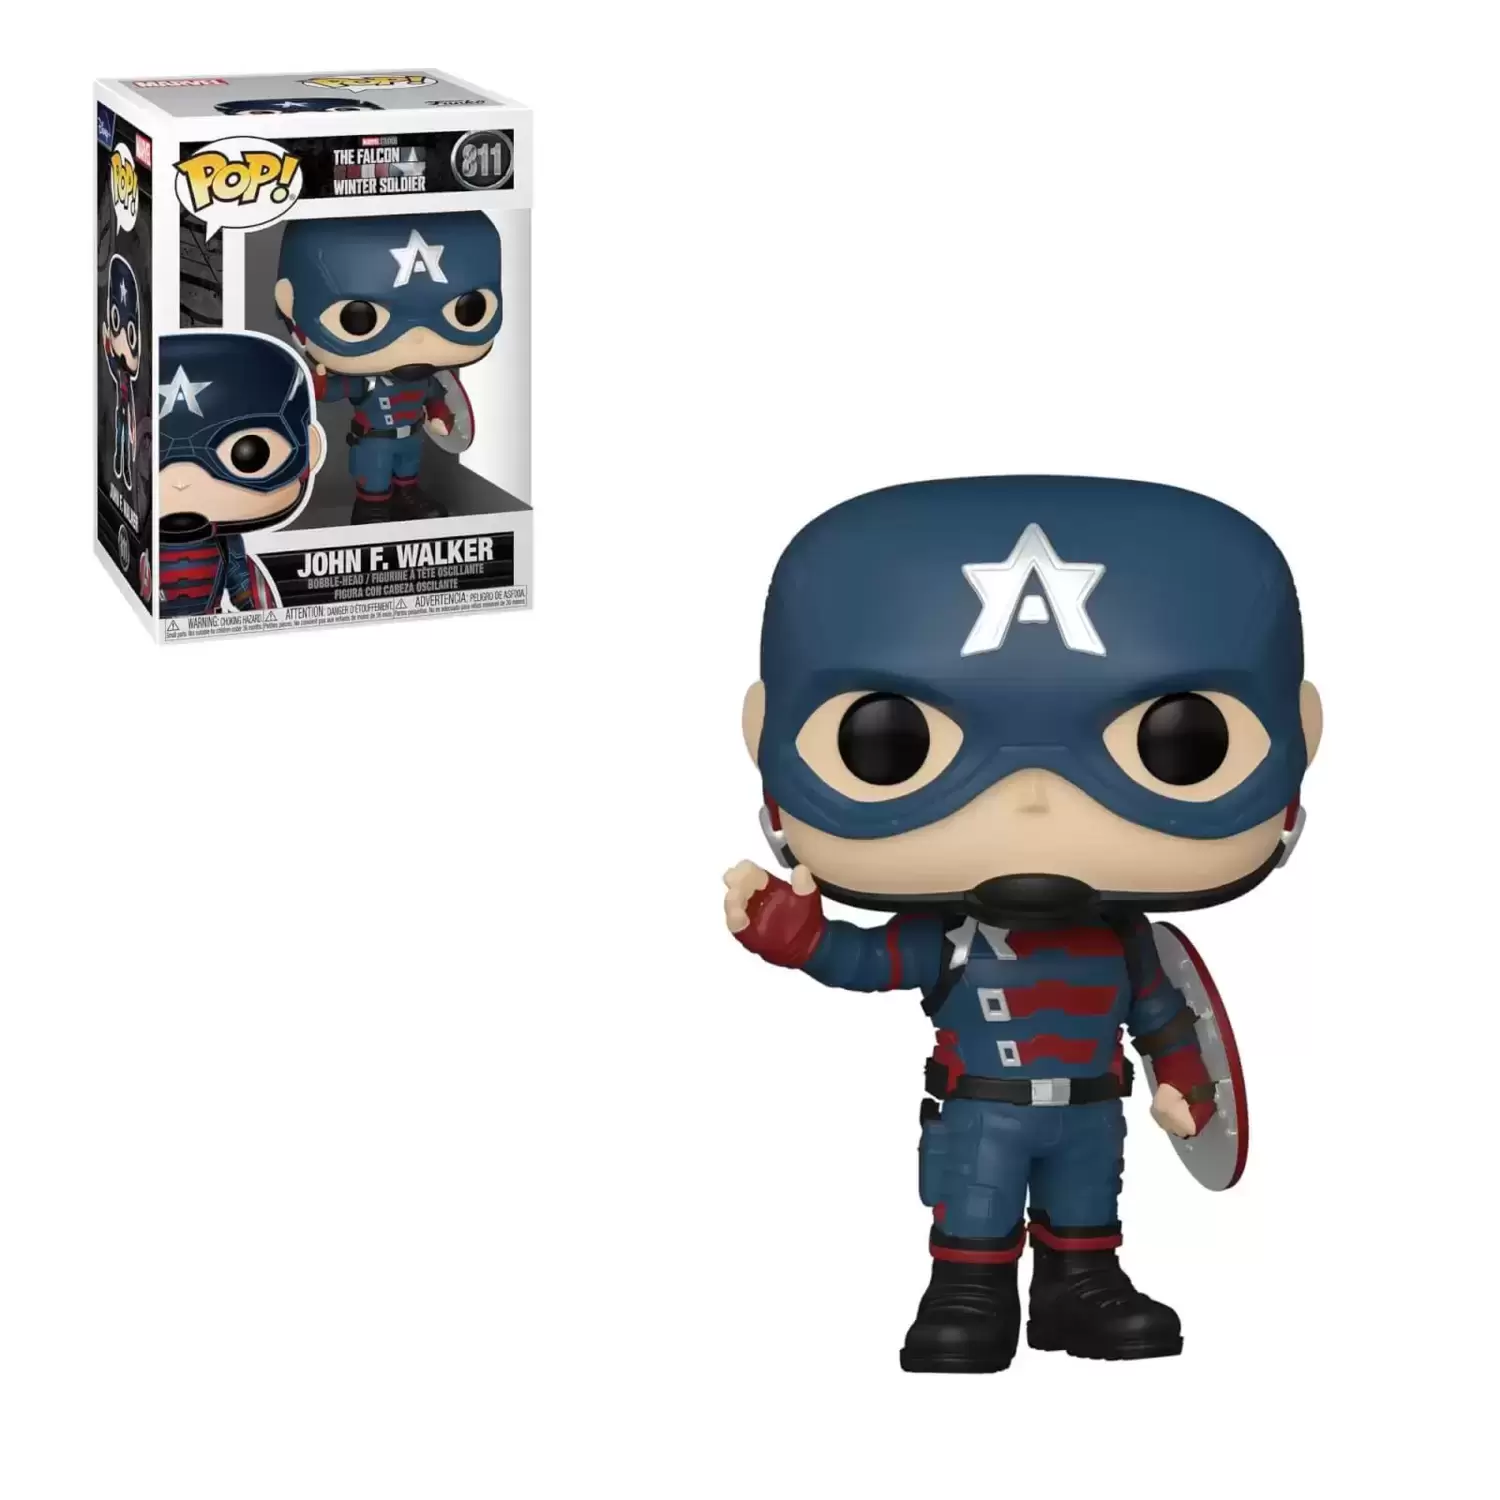 POP! MARVEL - The Falcon and The Winter Soldier - John F. Walker